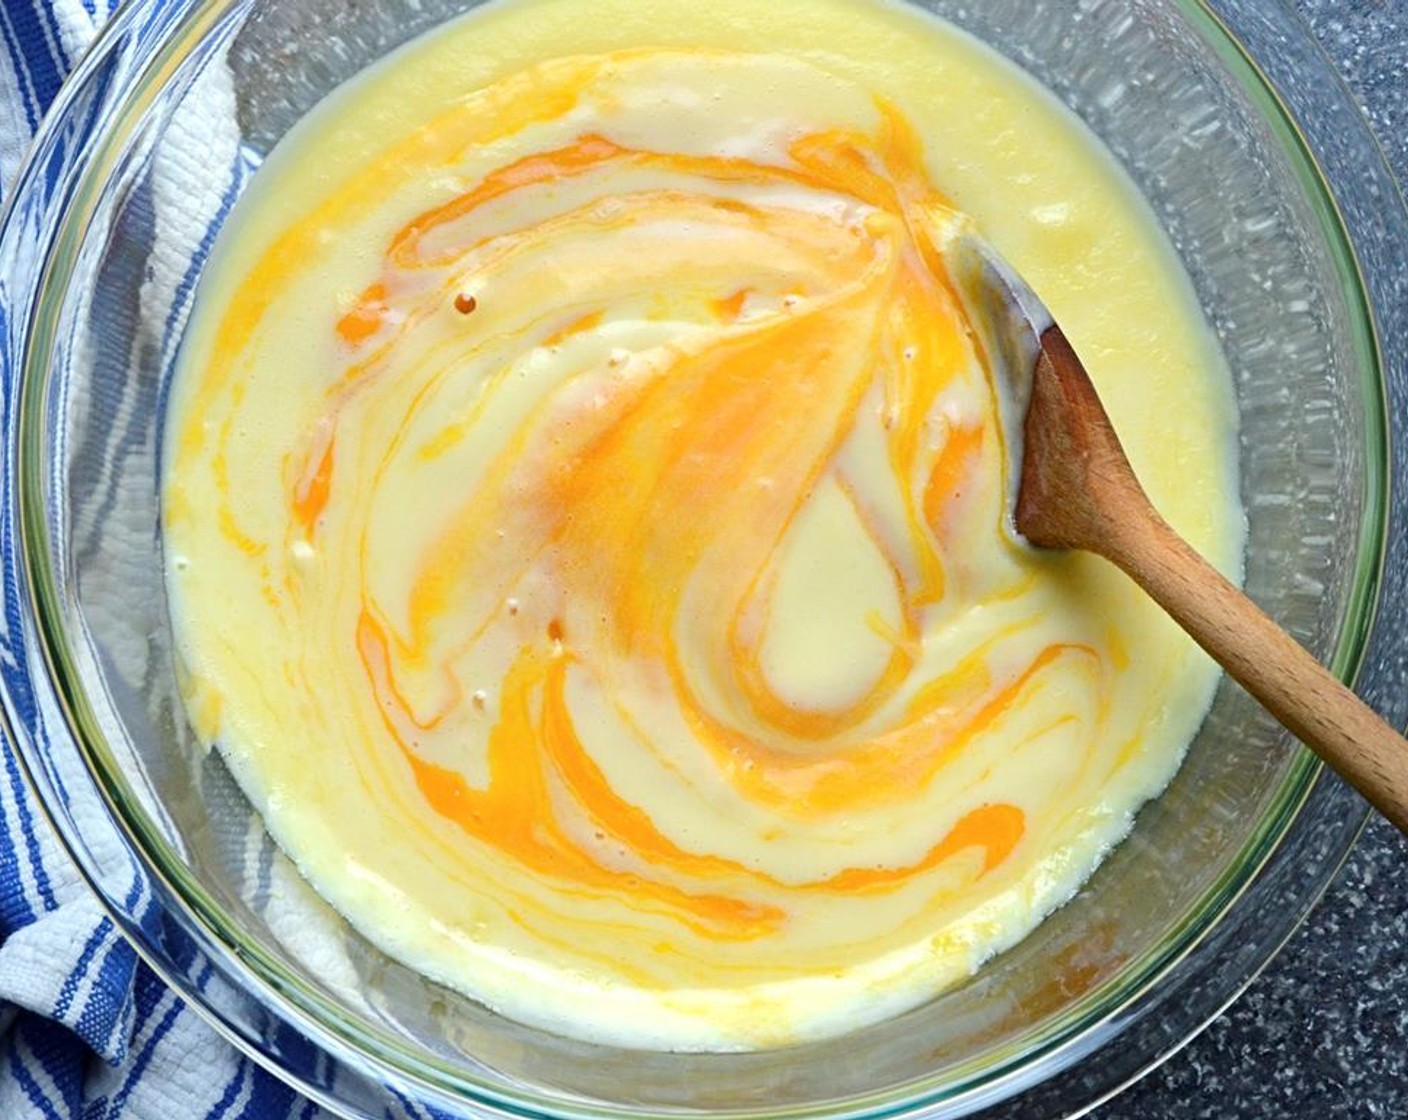 step 9 Stir in the Coconut Extract (1/2 tsp). Add the mango puree and stir to combine. Cover the custard with plastic wrap and refrigerate until very cold or overnight.